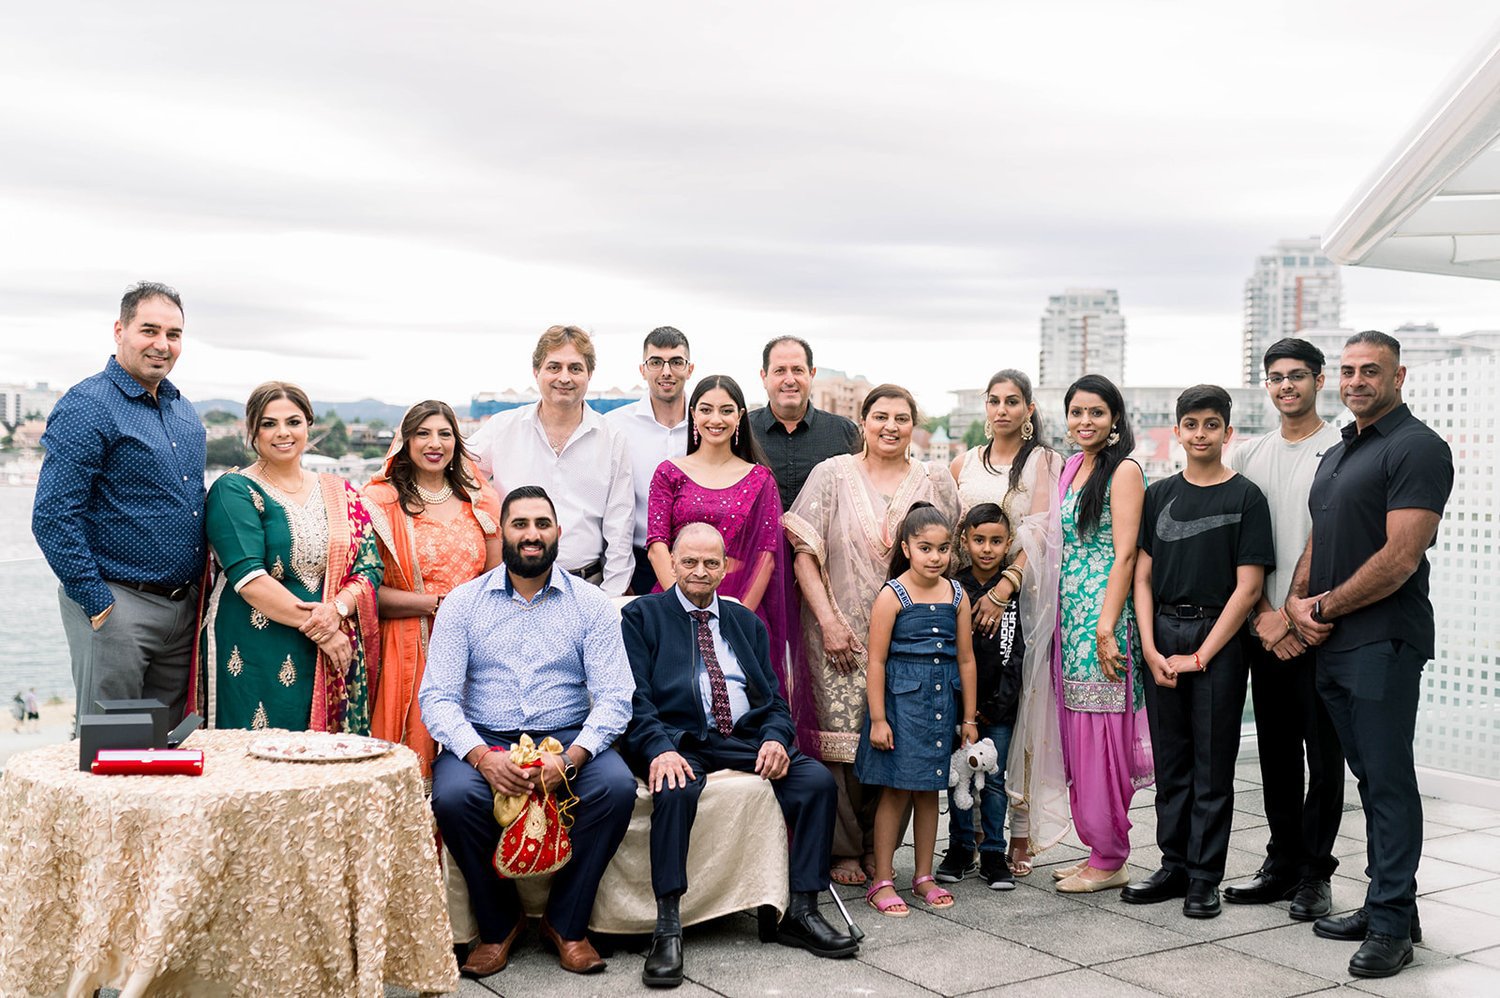 A Indian groom's large family gathers around him as he poses for a group photo during his Indian Wedding.